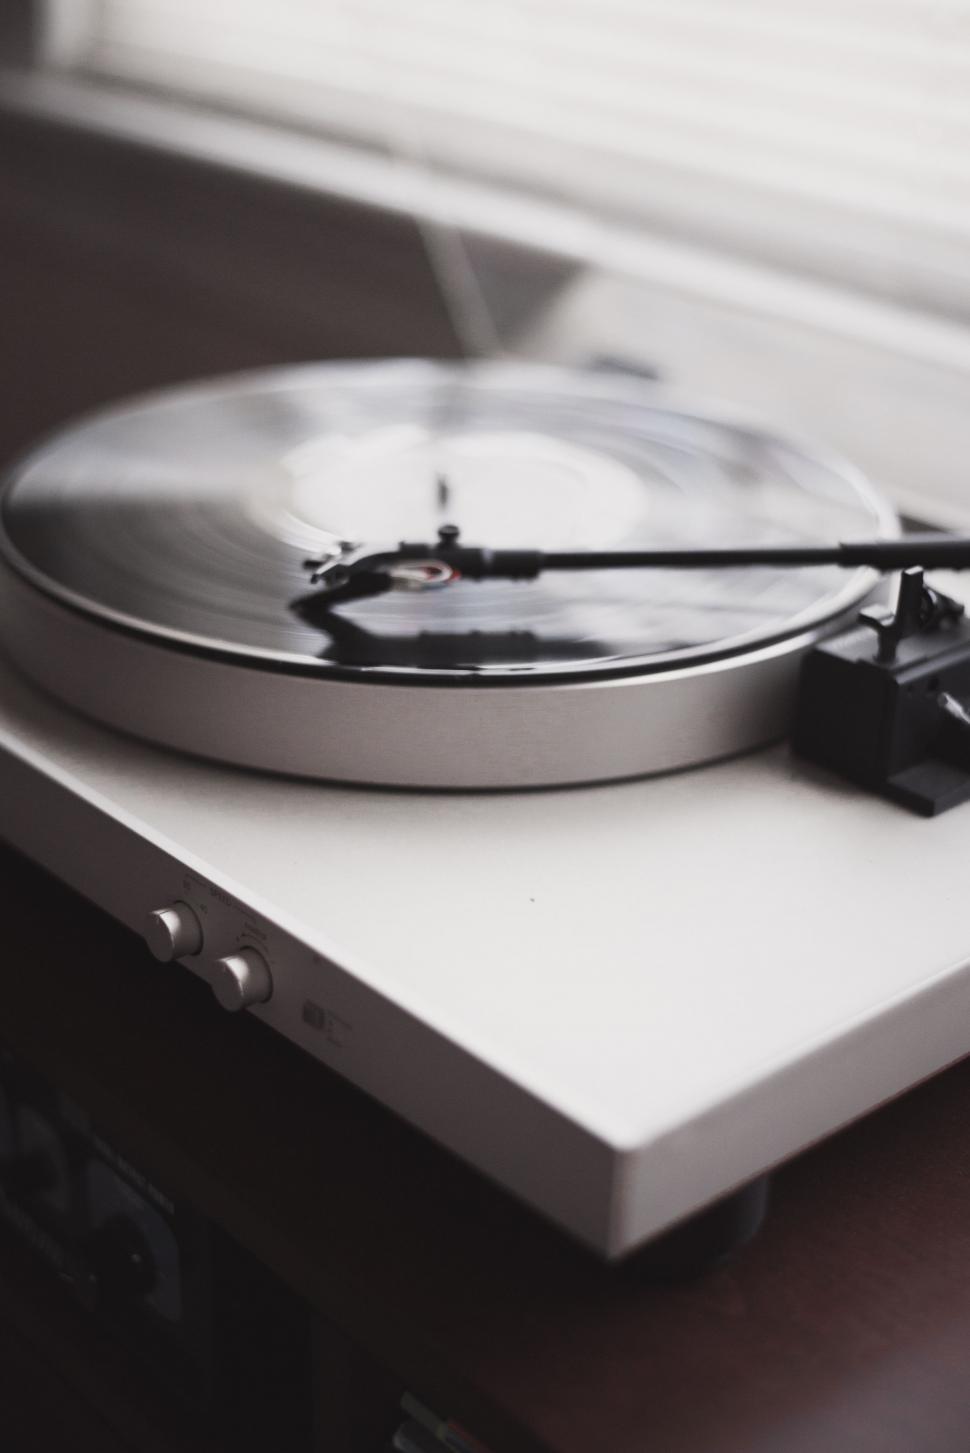 Free Image of Turntable on Table by Window 